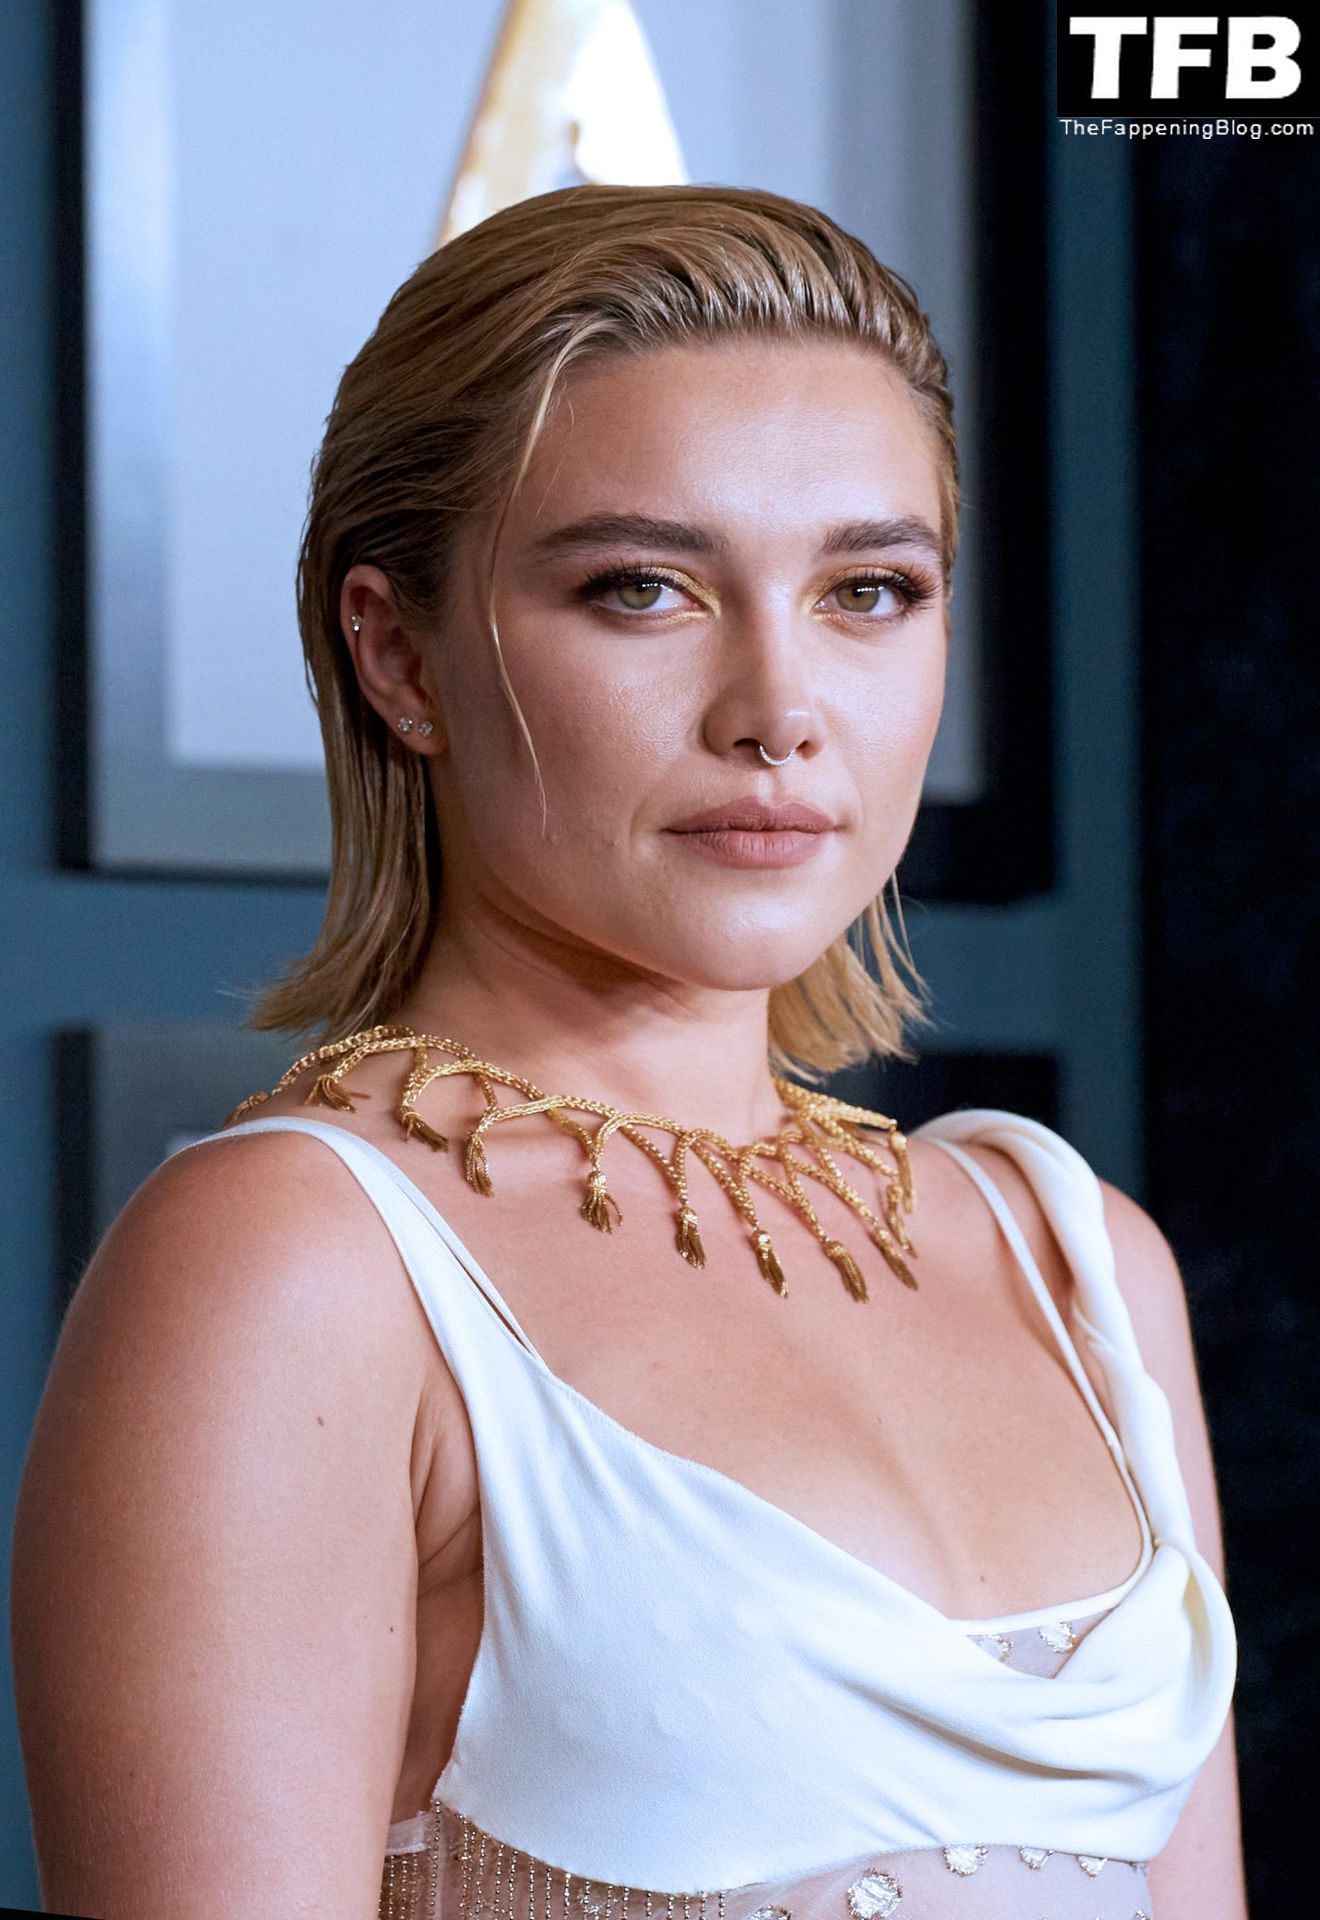 Florence-Pugh-Sexy-The-Fappening-Blog-3-1.jpg